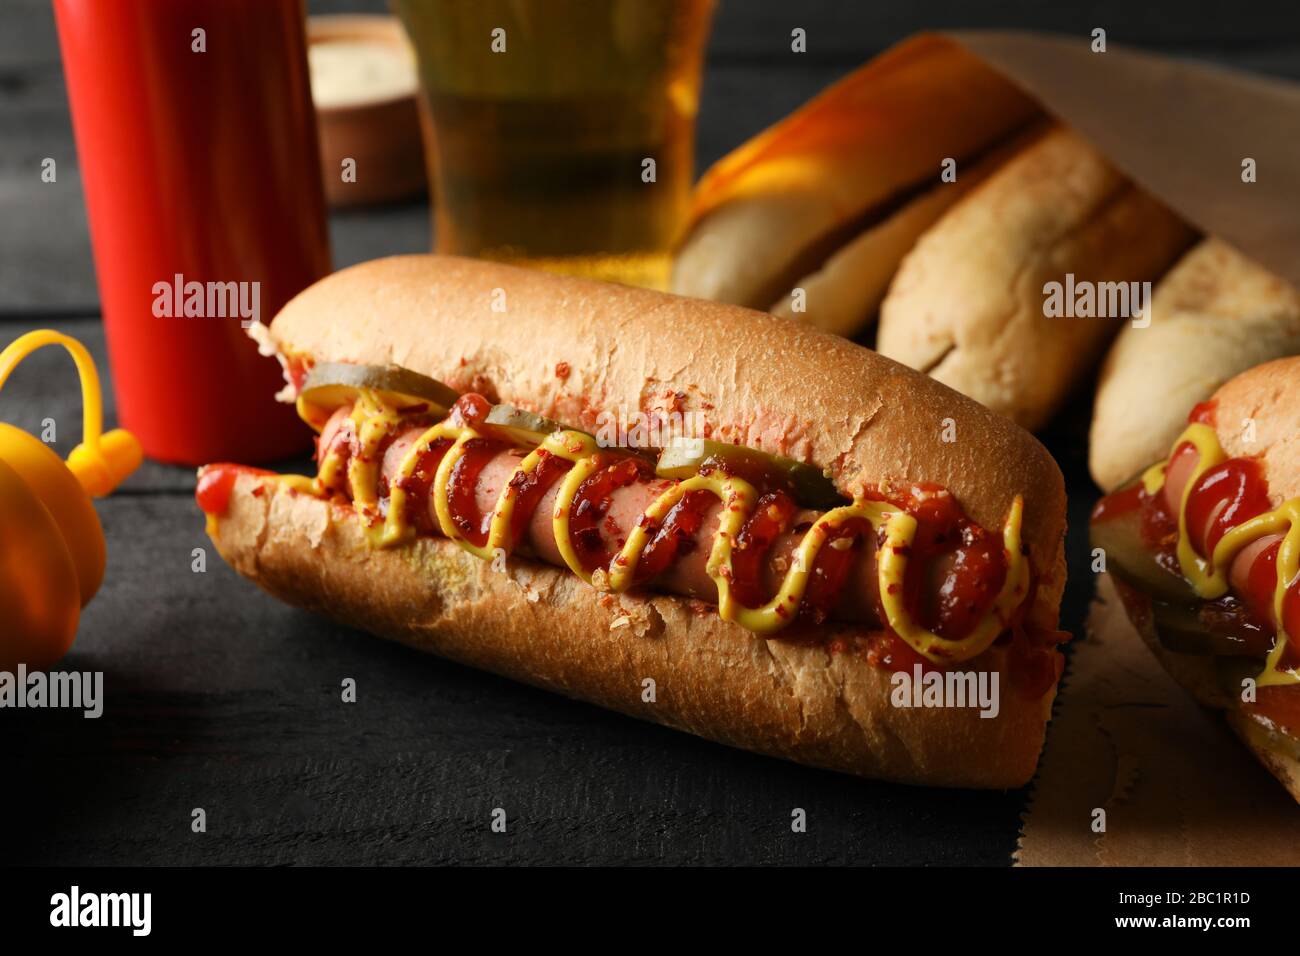 Composition with tasty hot dogs on wooden background Stock Photo